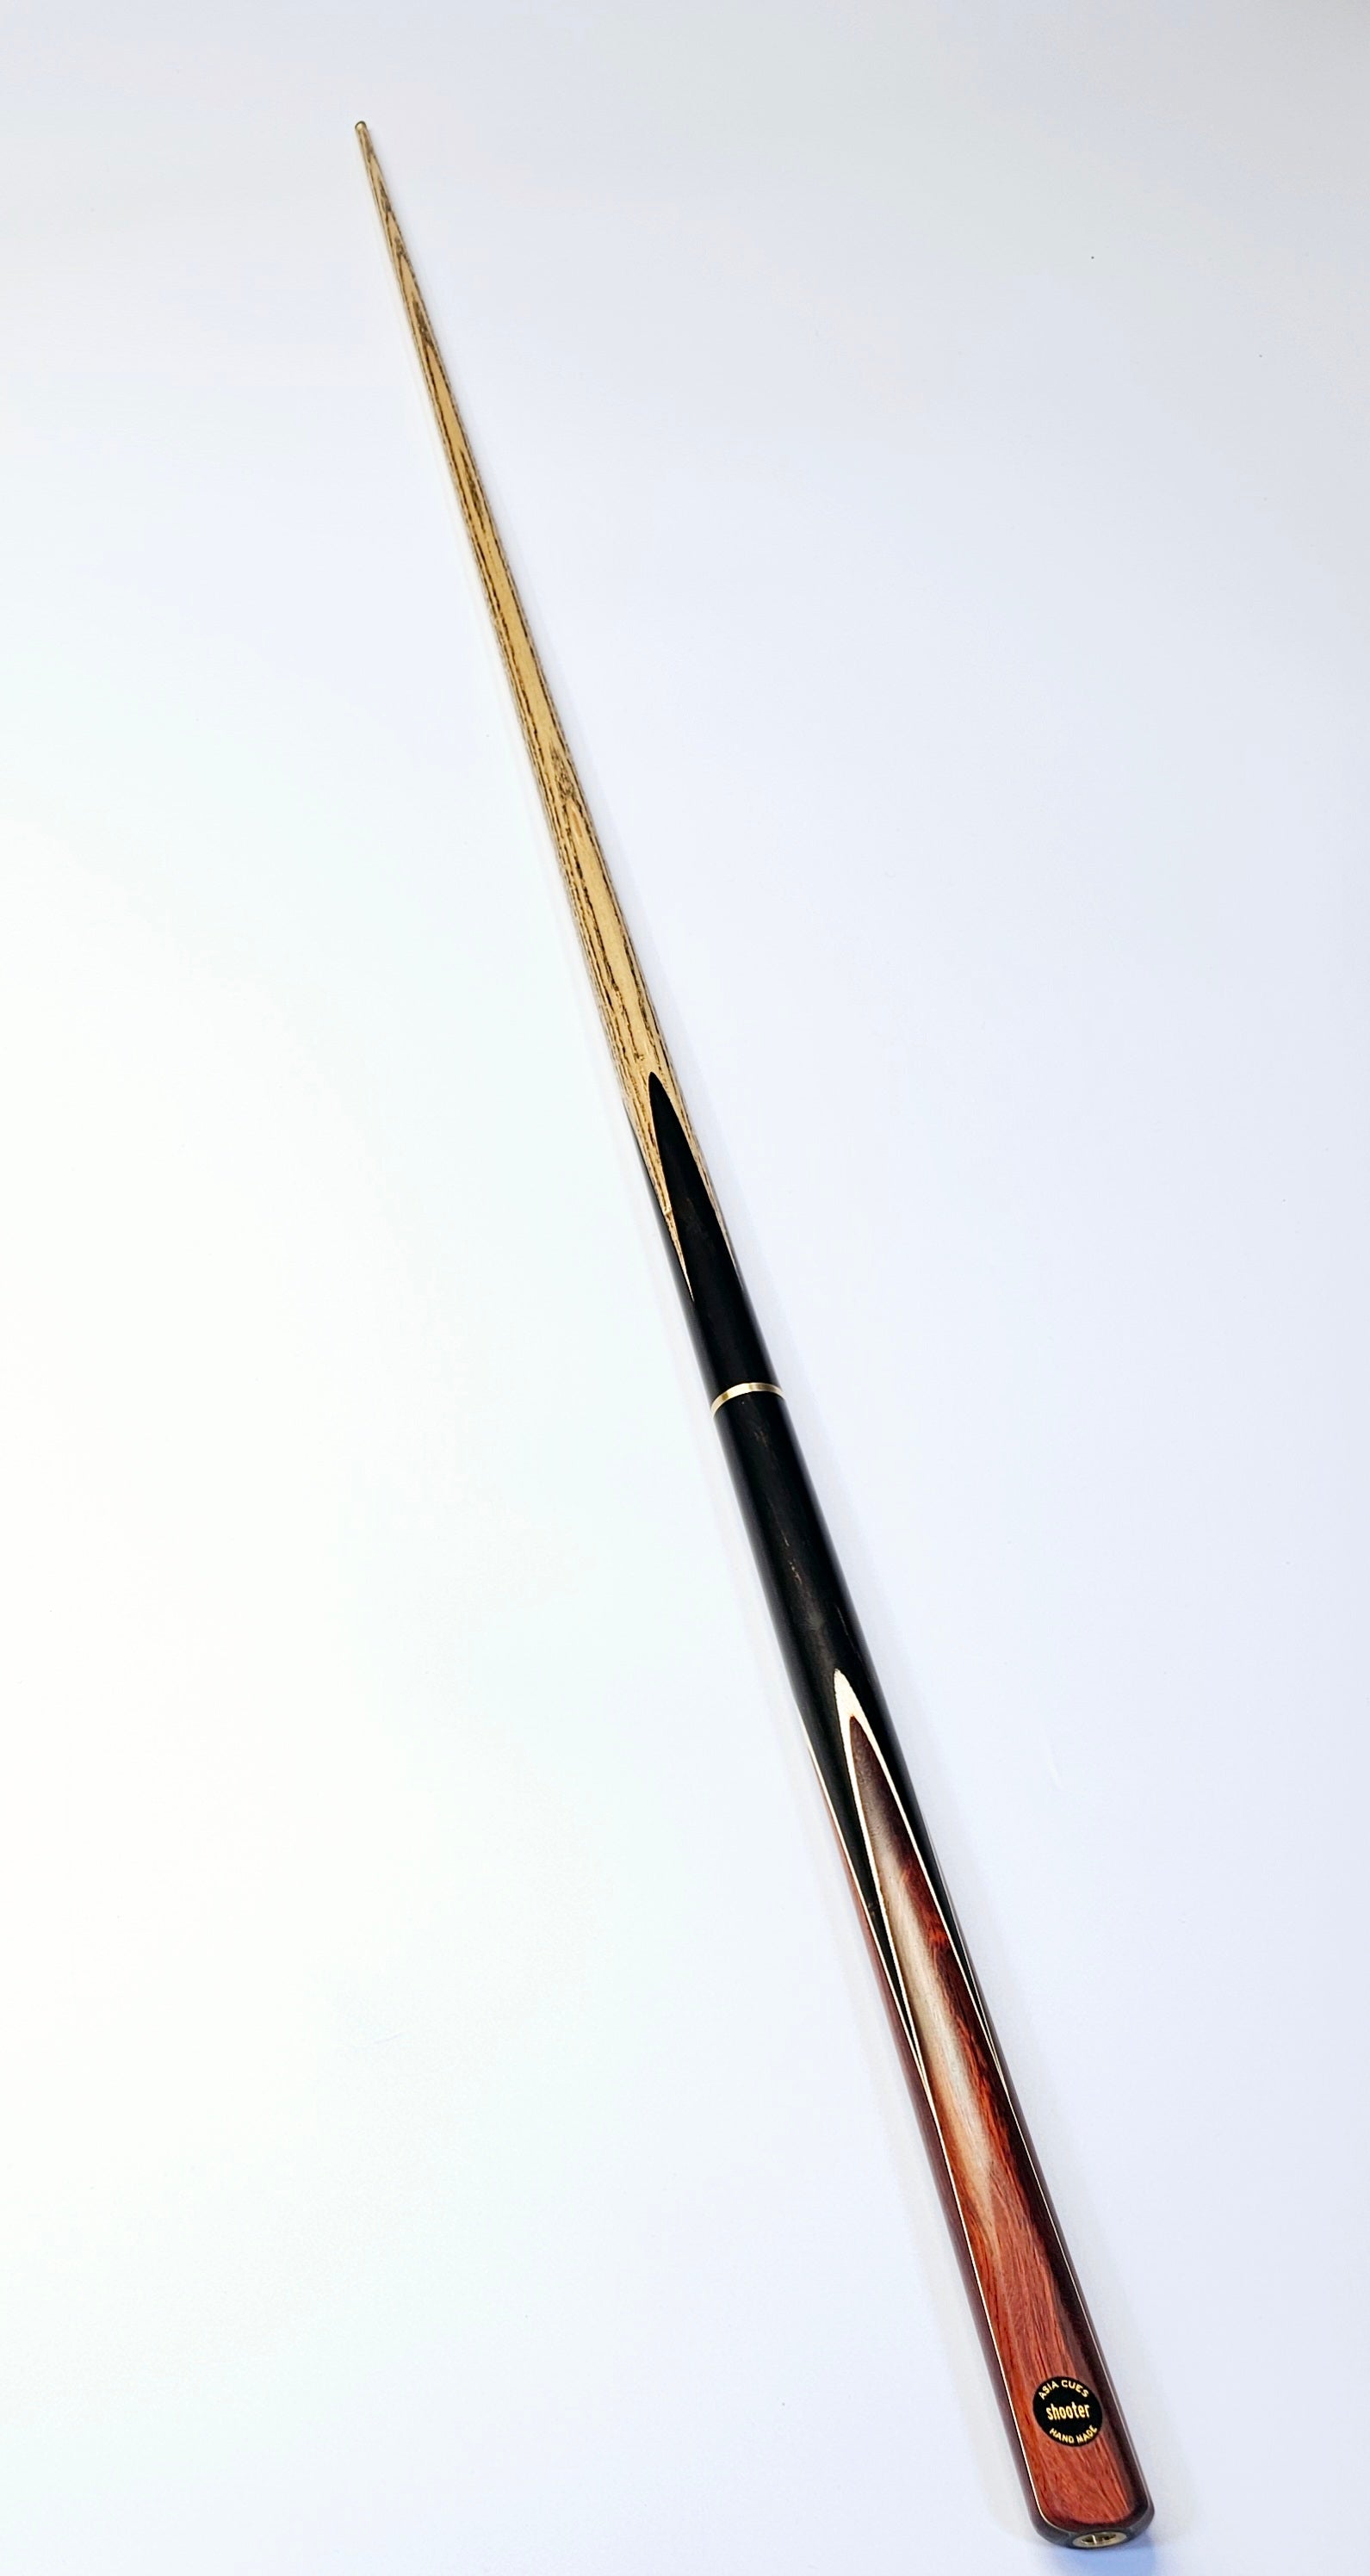 Asia Cues Shooter - 3/4 Jointed Pool Cue 8.4mm Tip, 17oz, 58"